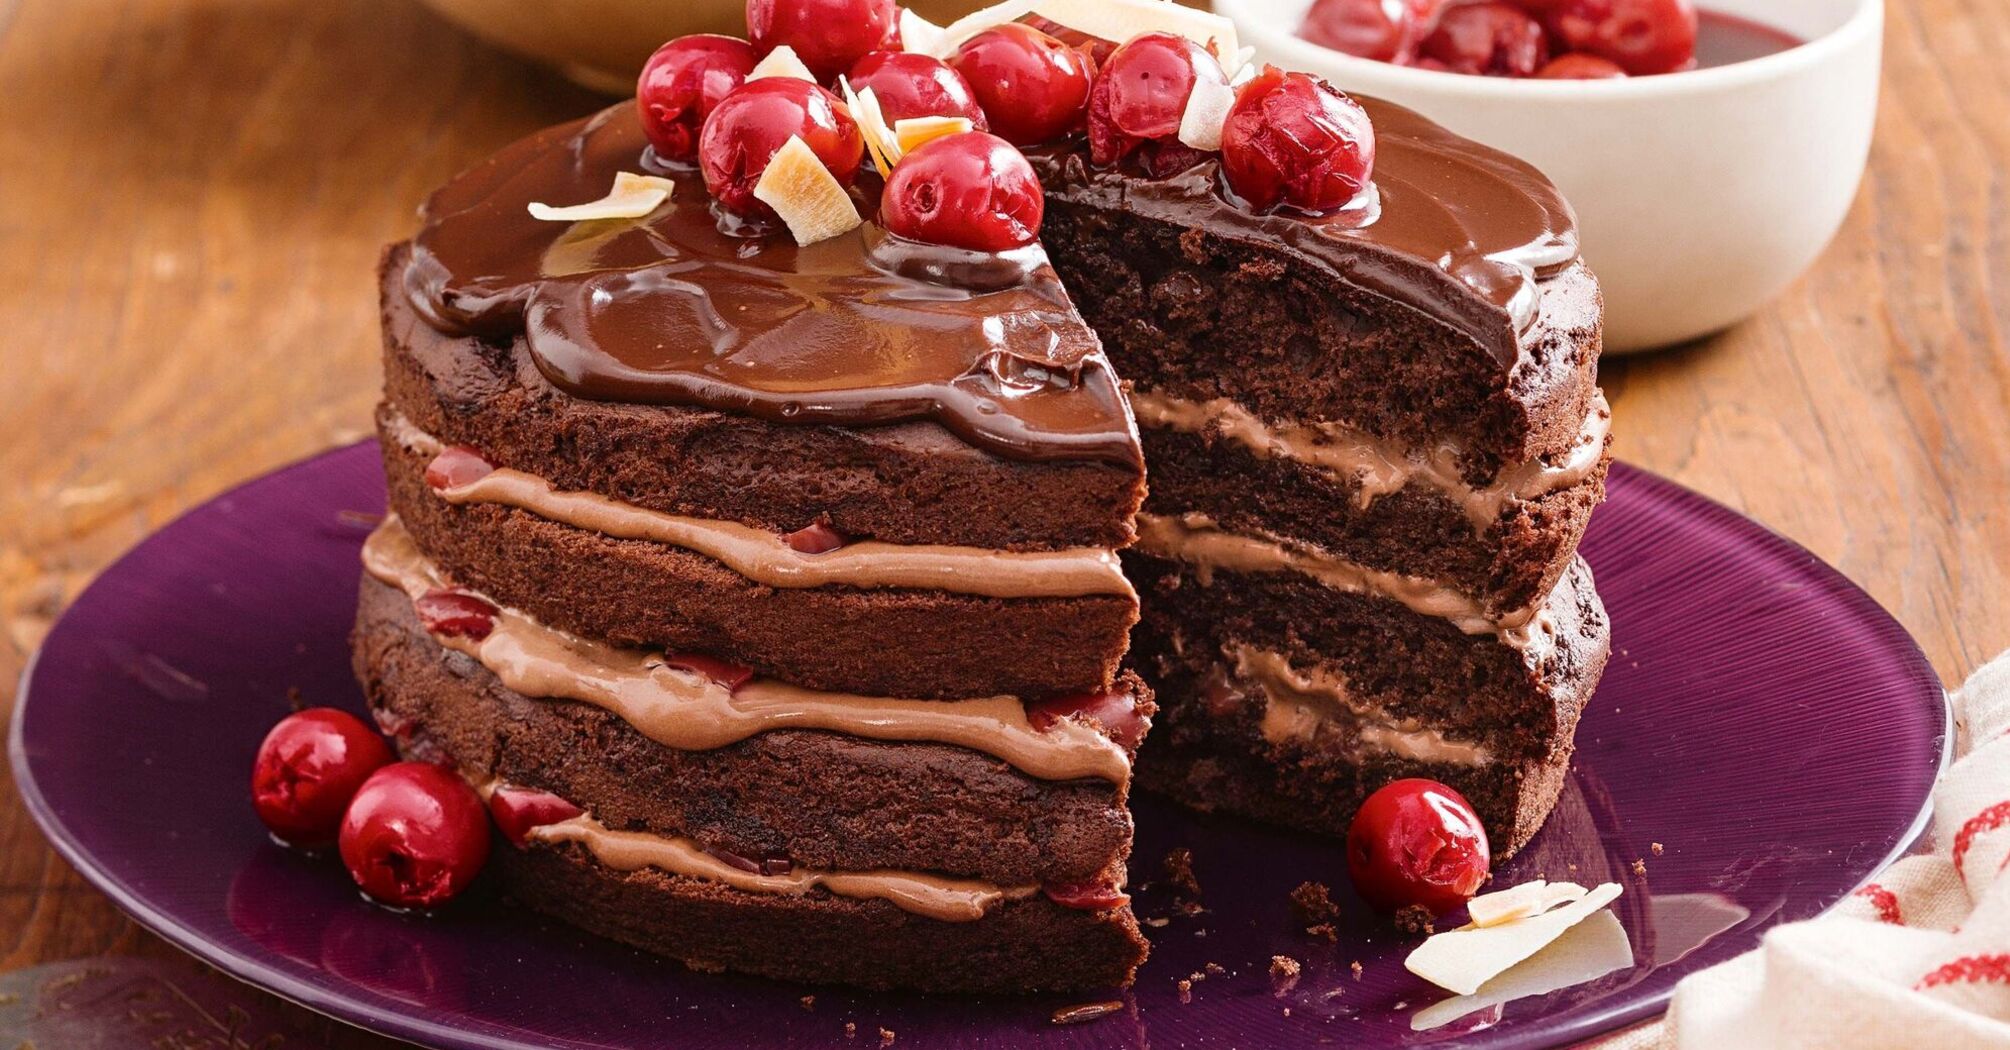 Fluffy chocolate cake with cherries: a variation on the basic tea cake